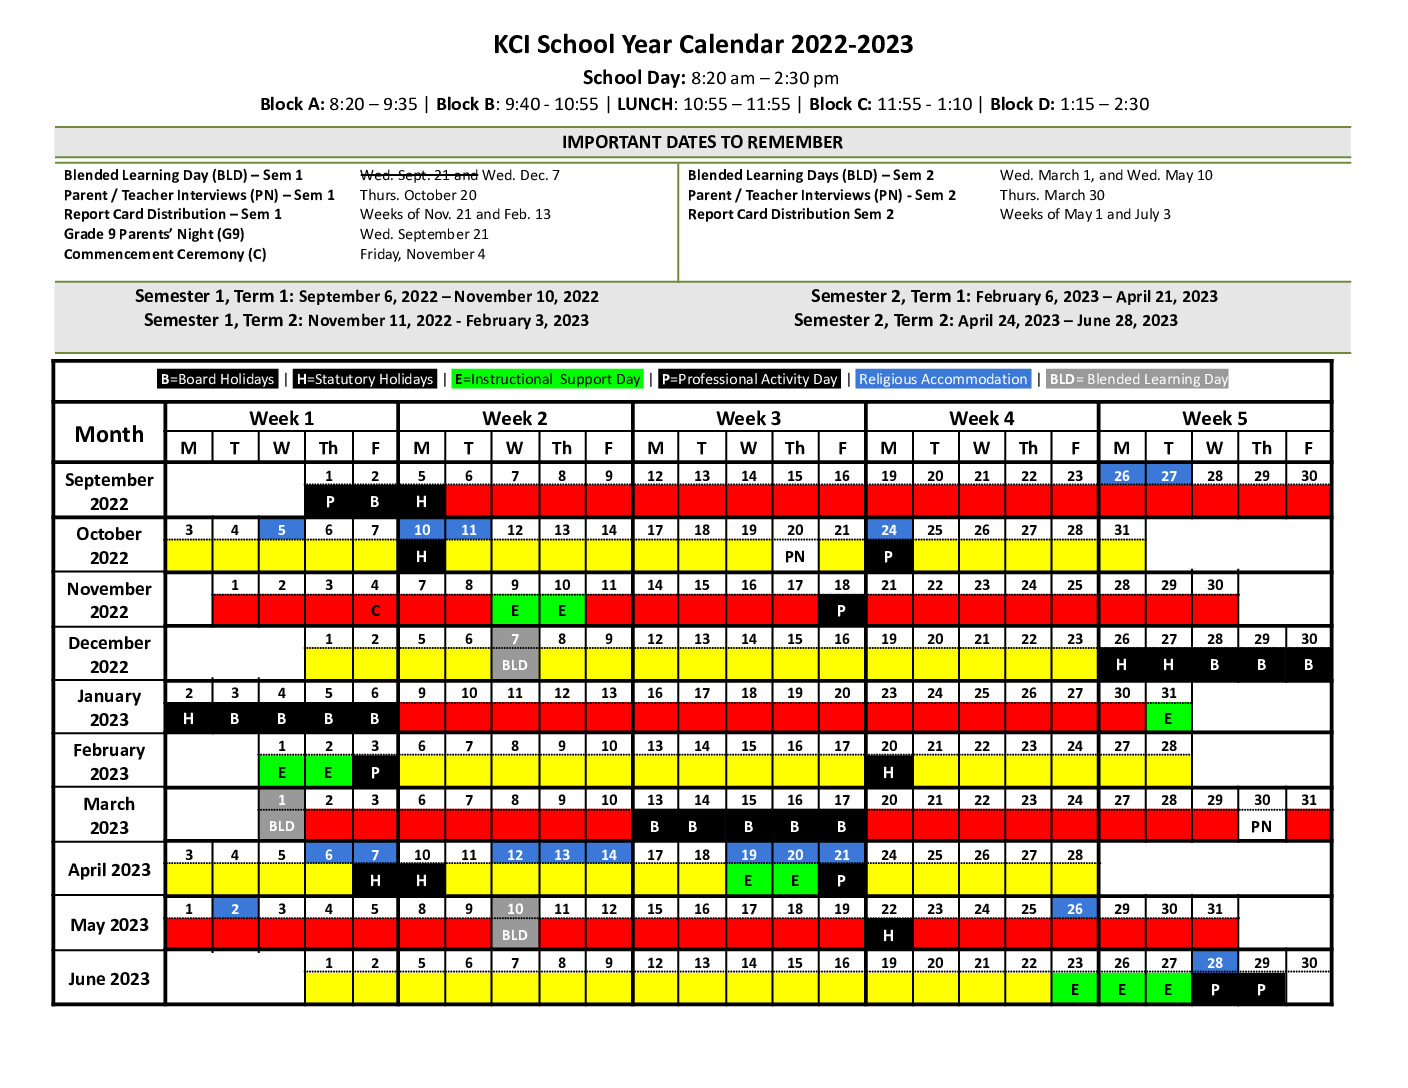 2022-23 School Year Calendar is now available (Kitchener-Waterloo